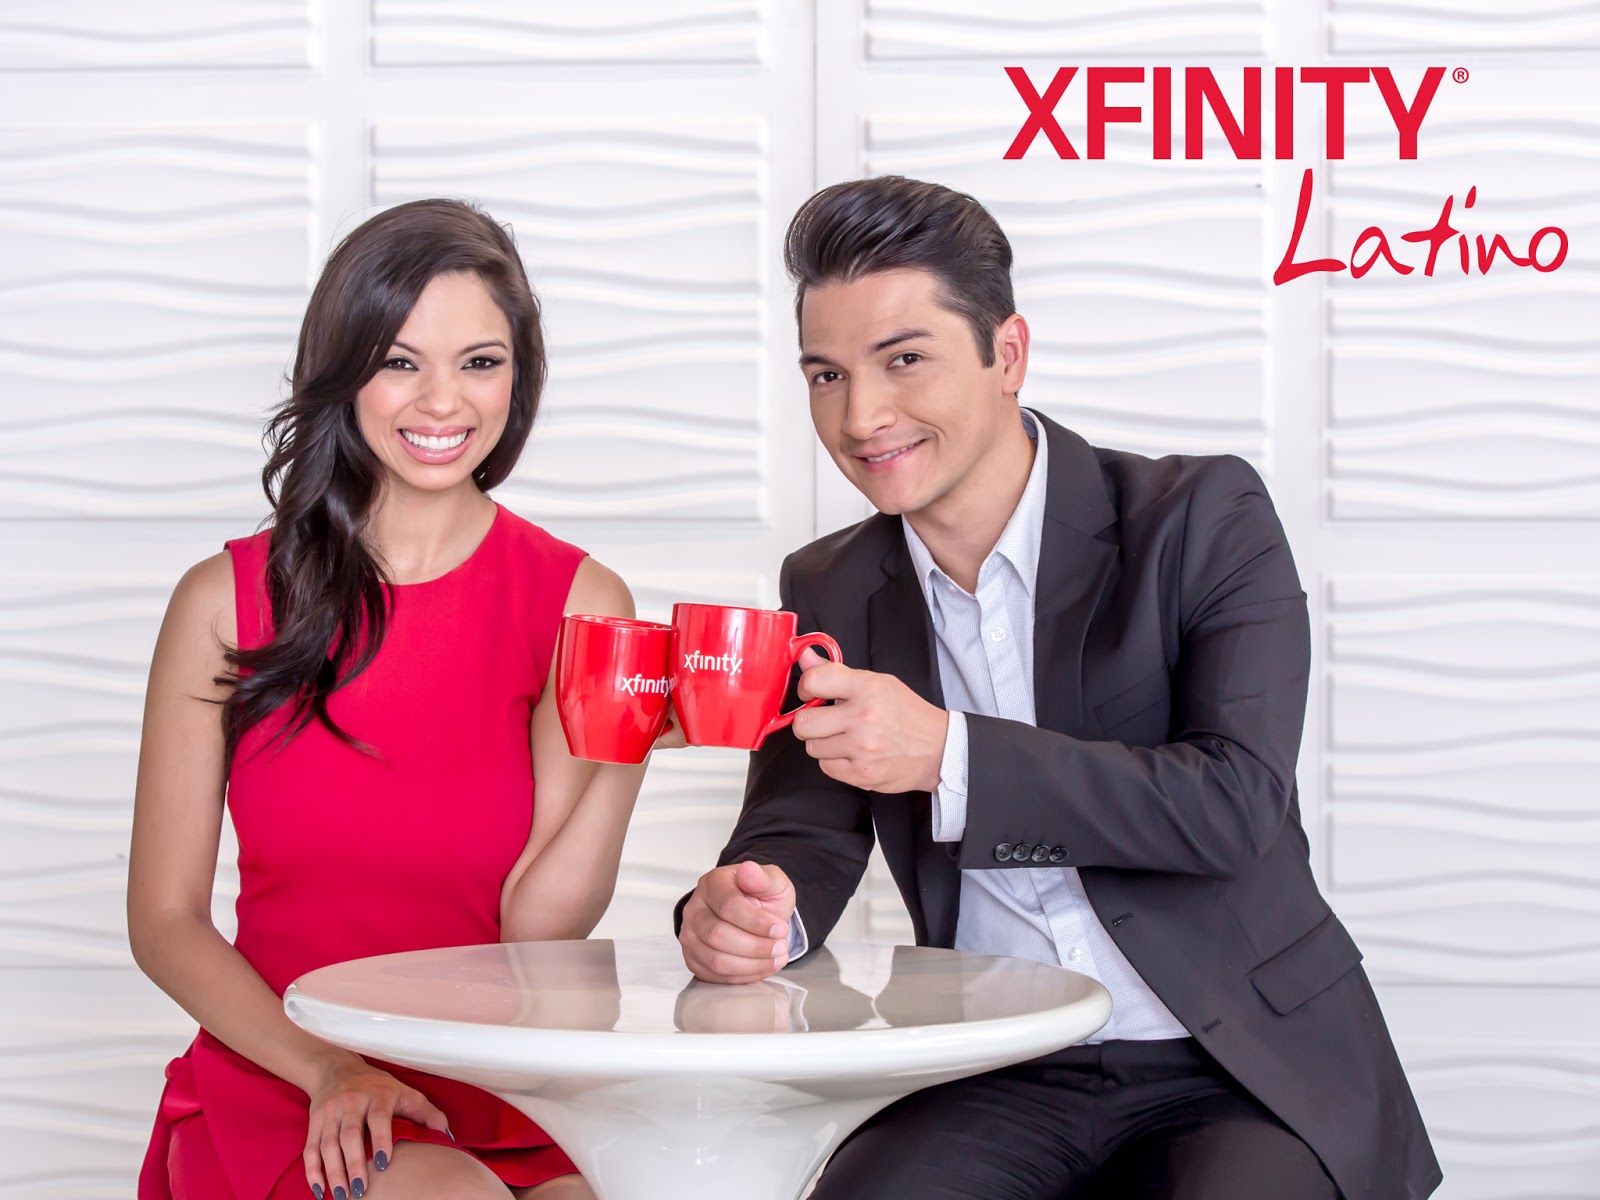 COMCAST Revamps Latino Entertainment Channel, Launches Weekly XFINITY LATINO Segments for Bicultural Families